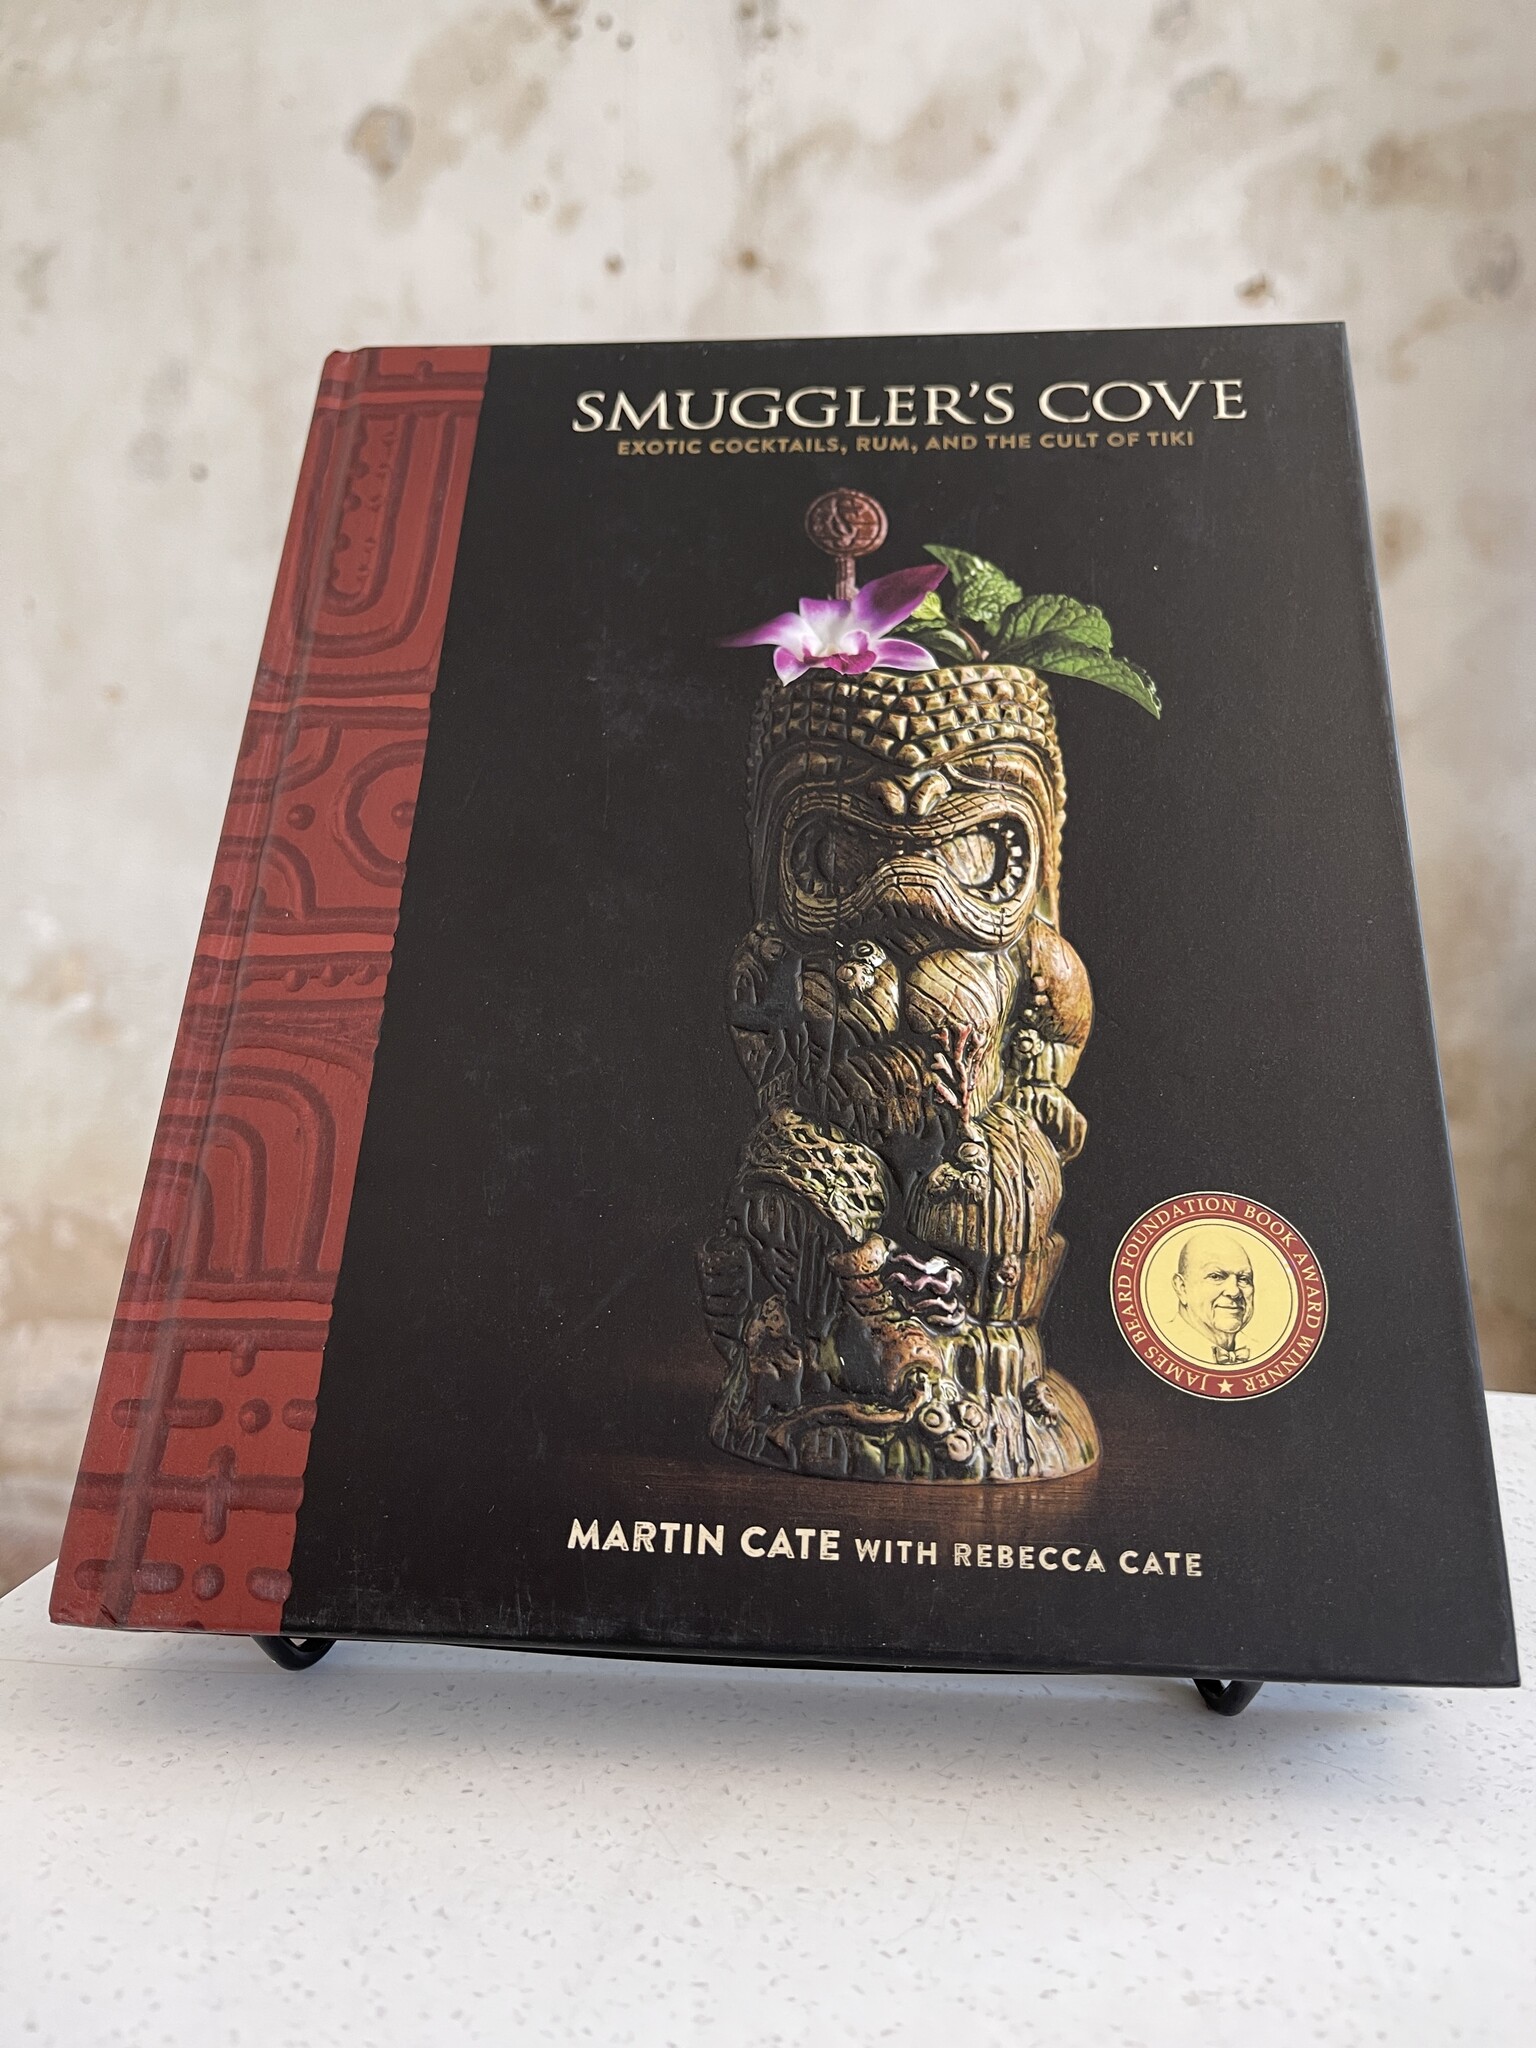 Smuggler's Cove by Martin Cate